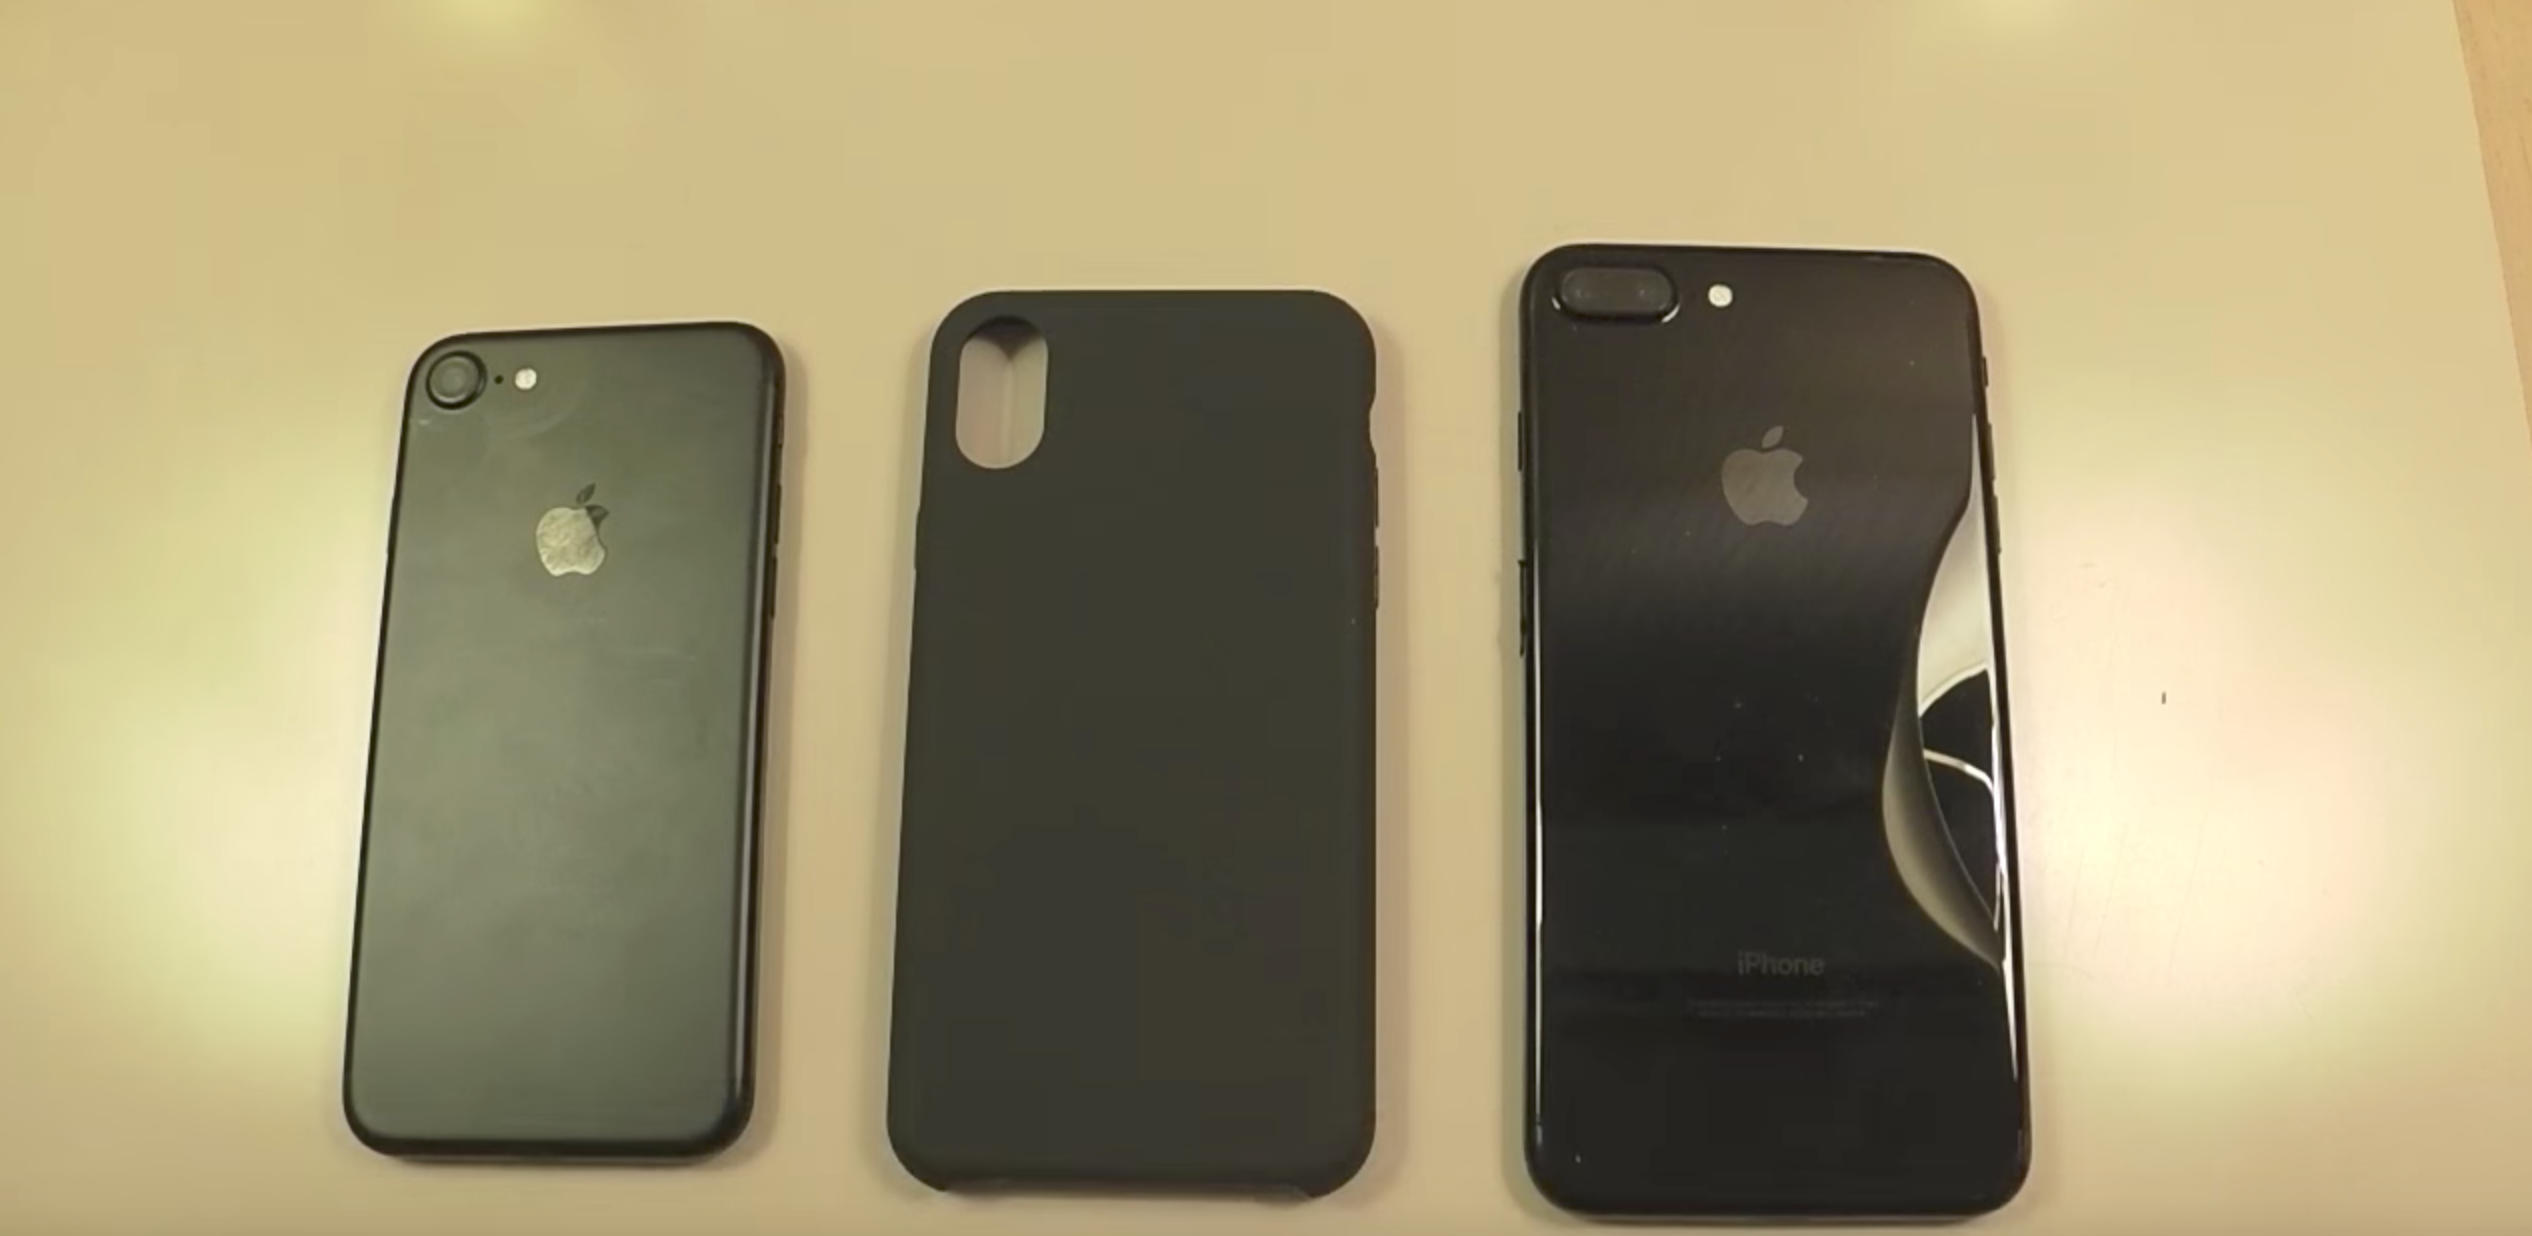 iPhone 8 case leak claims to show device to iPhone 7 & iPhone 7 Plus [Video] - 9to5Mac